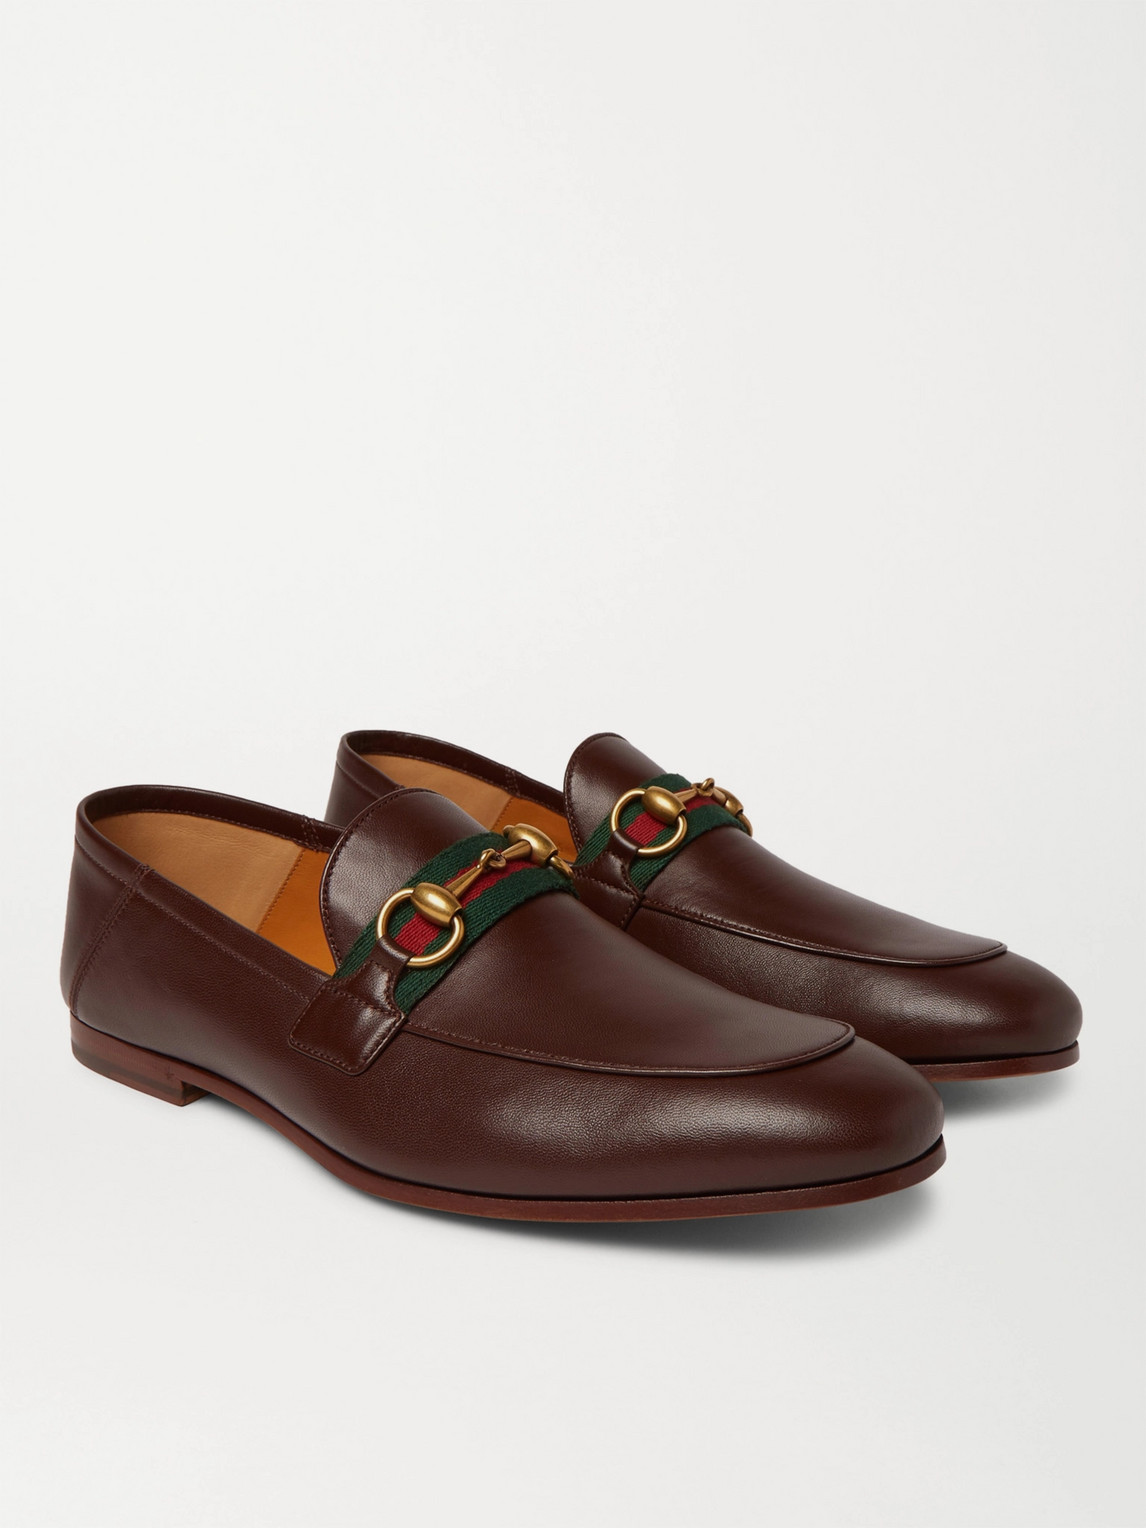 GUCCI BRIXTON WEBBING-TRIMMED HORSEBIT COLLAPSIBLE-HEEL LEATHER LOAFERS